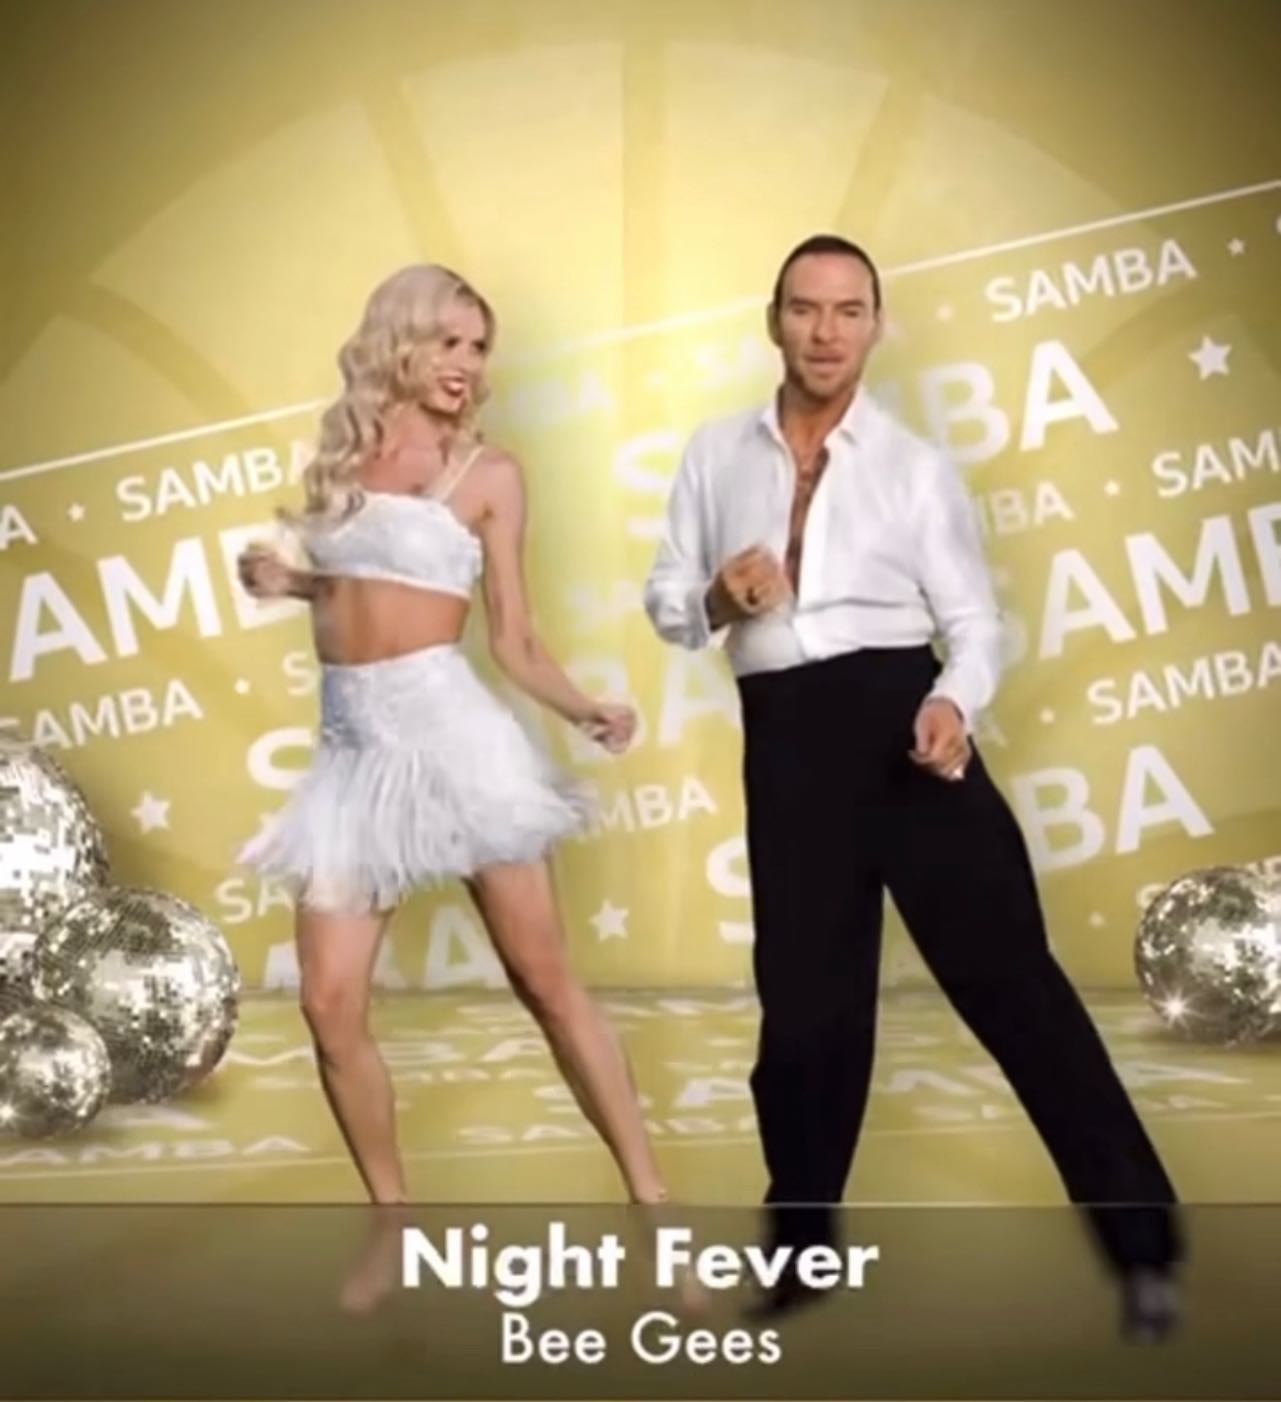 Week 2 will be The Samba, the song will be Night Fever by The Bee Gees.
Make sure you tune in to @bbcstrictly on Saturday night to watch @mattgoss and @nadiyabychkova 

#mattgoss #strictly #nightfever #music #singer #london #songwriter #singersongwriter #instamusic #musician #musicartist #musiciansofinstagram #musicbusiness #musicindustry #beegees #newalbum #newsingle #areyouready #bbcstrictly #thebeautifulunknown #strictlycomedancing #nadiyabychkova